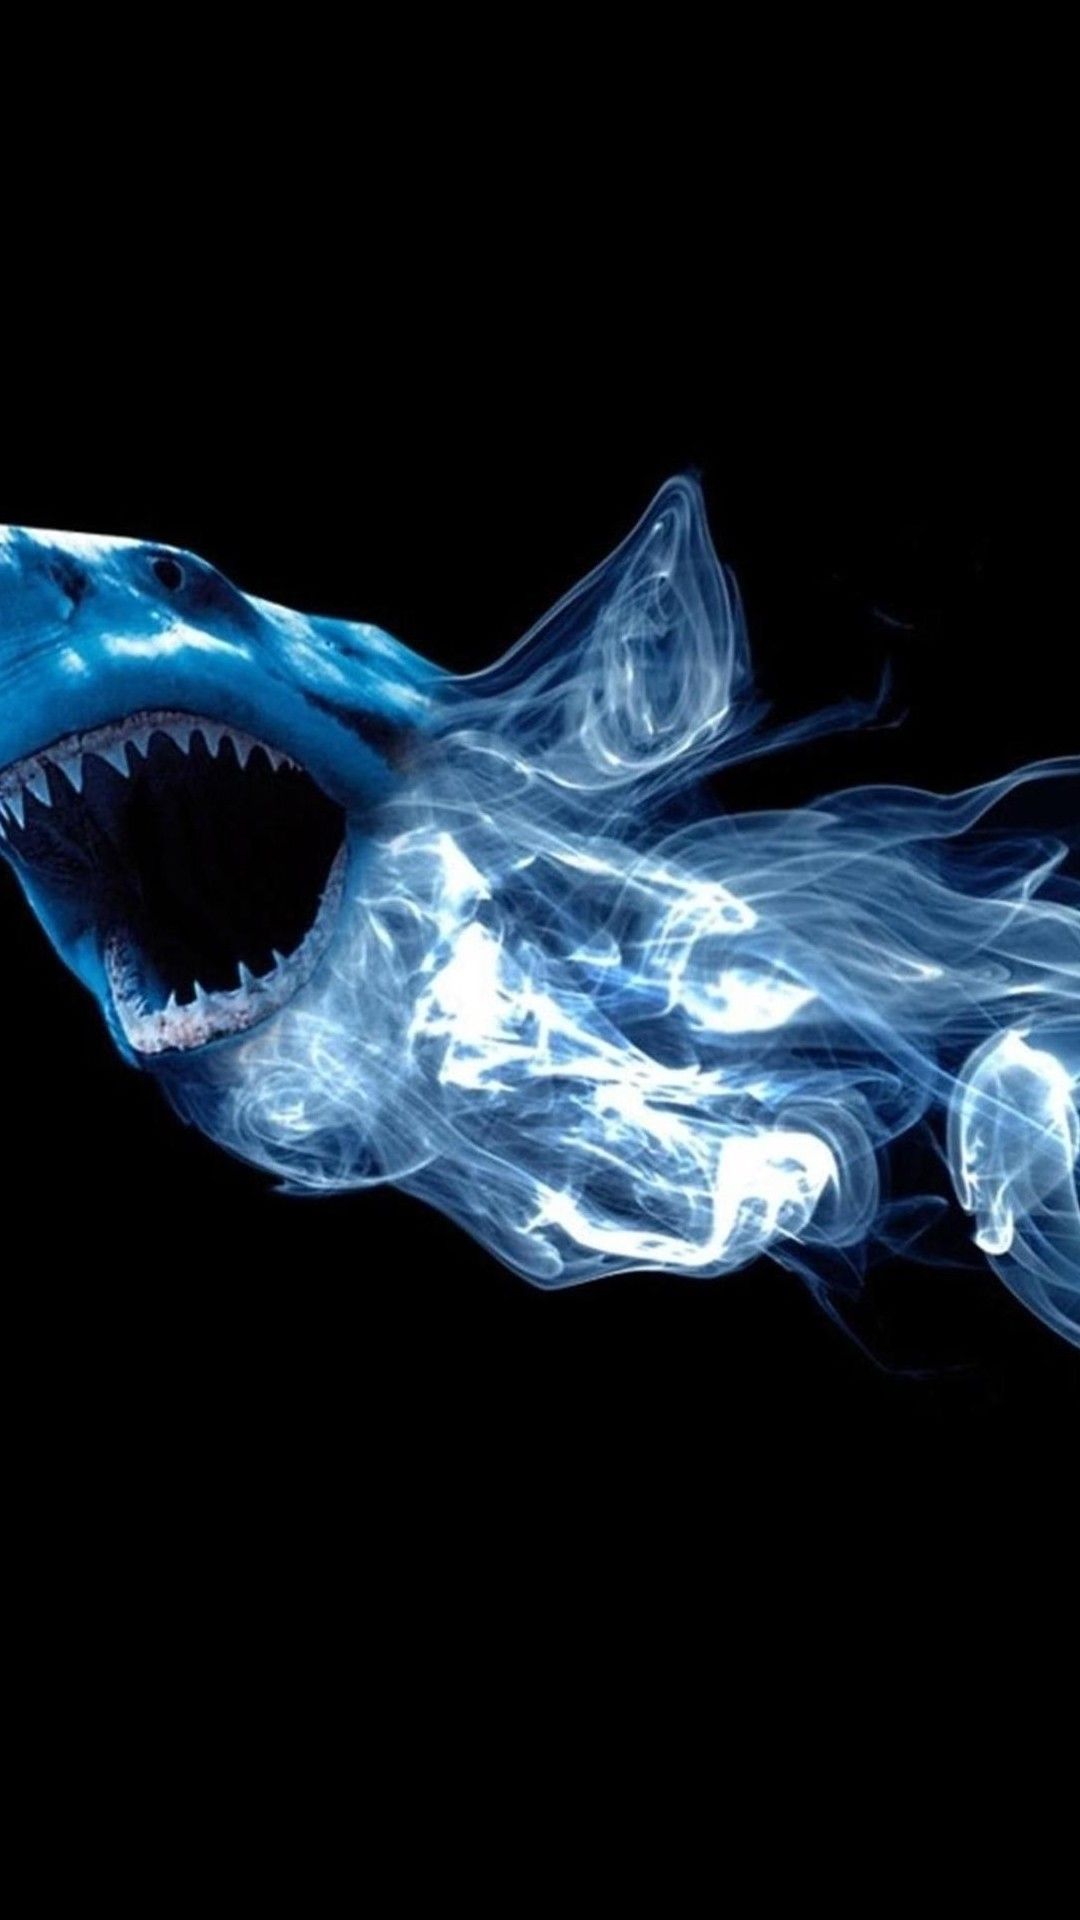 Abstract Shark Neon Light Smoke Android Wallpaper free download